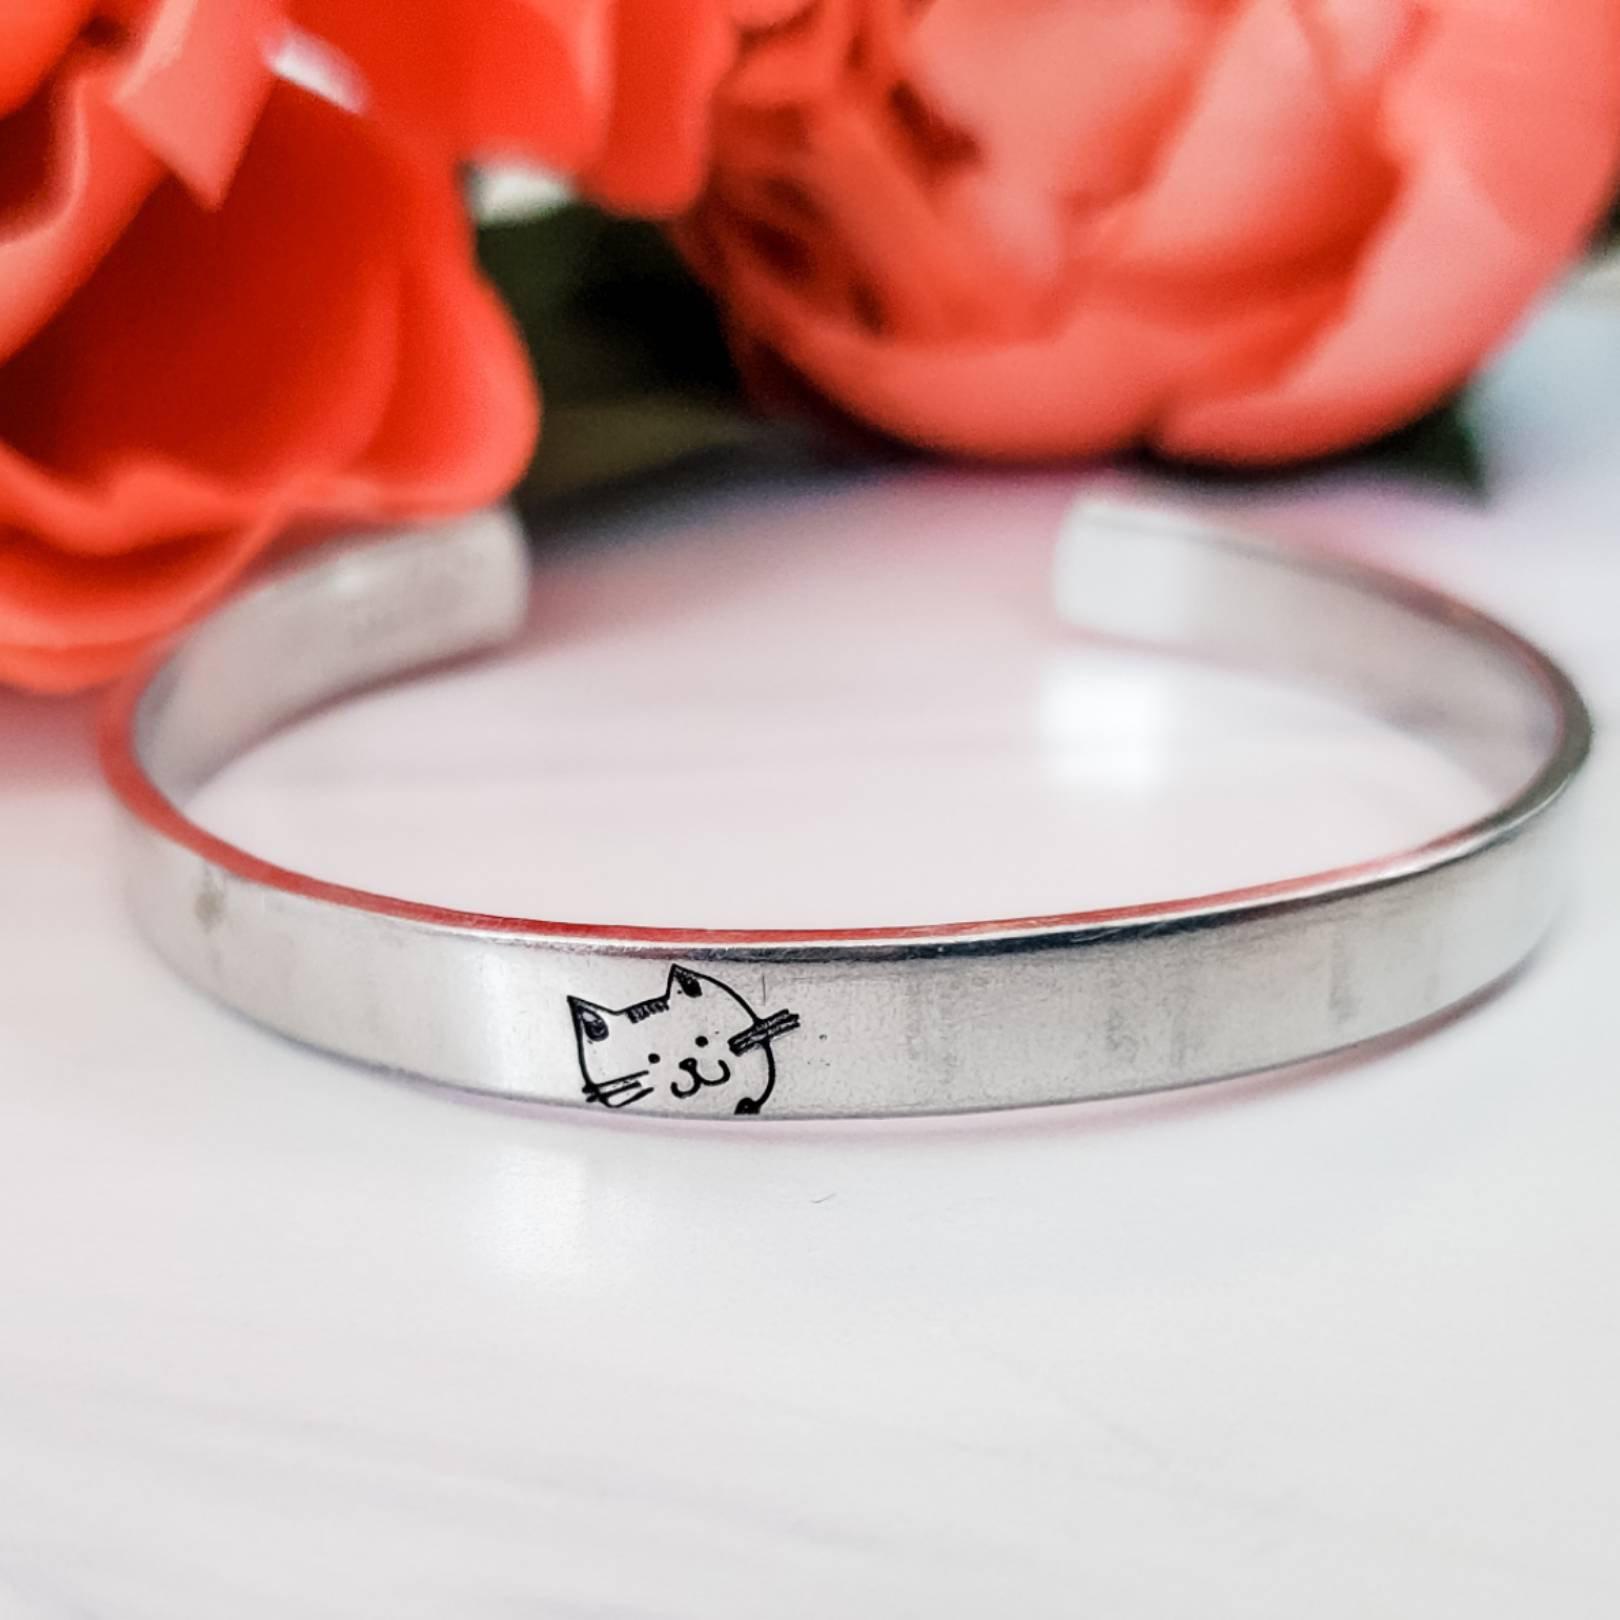 Kitty Face Stacking Cuff Bracelet Salt and Sparkle